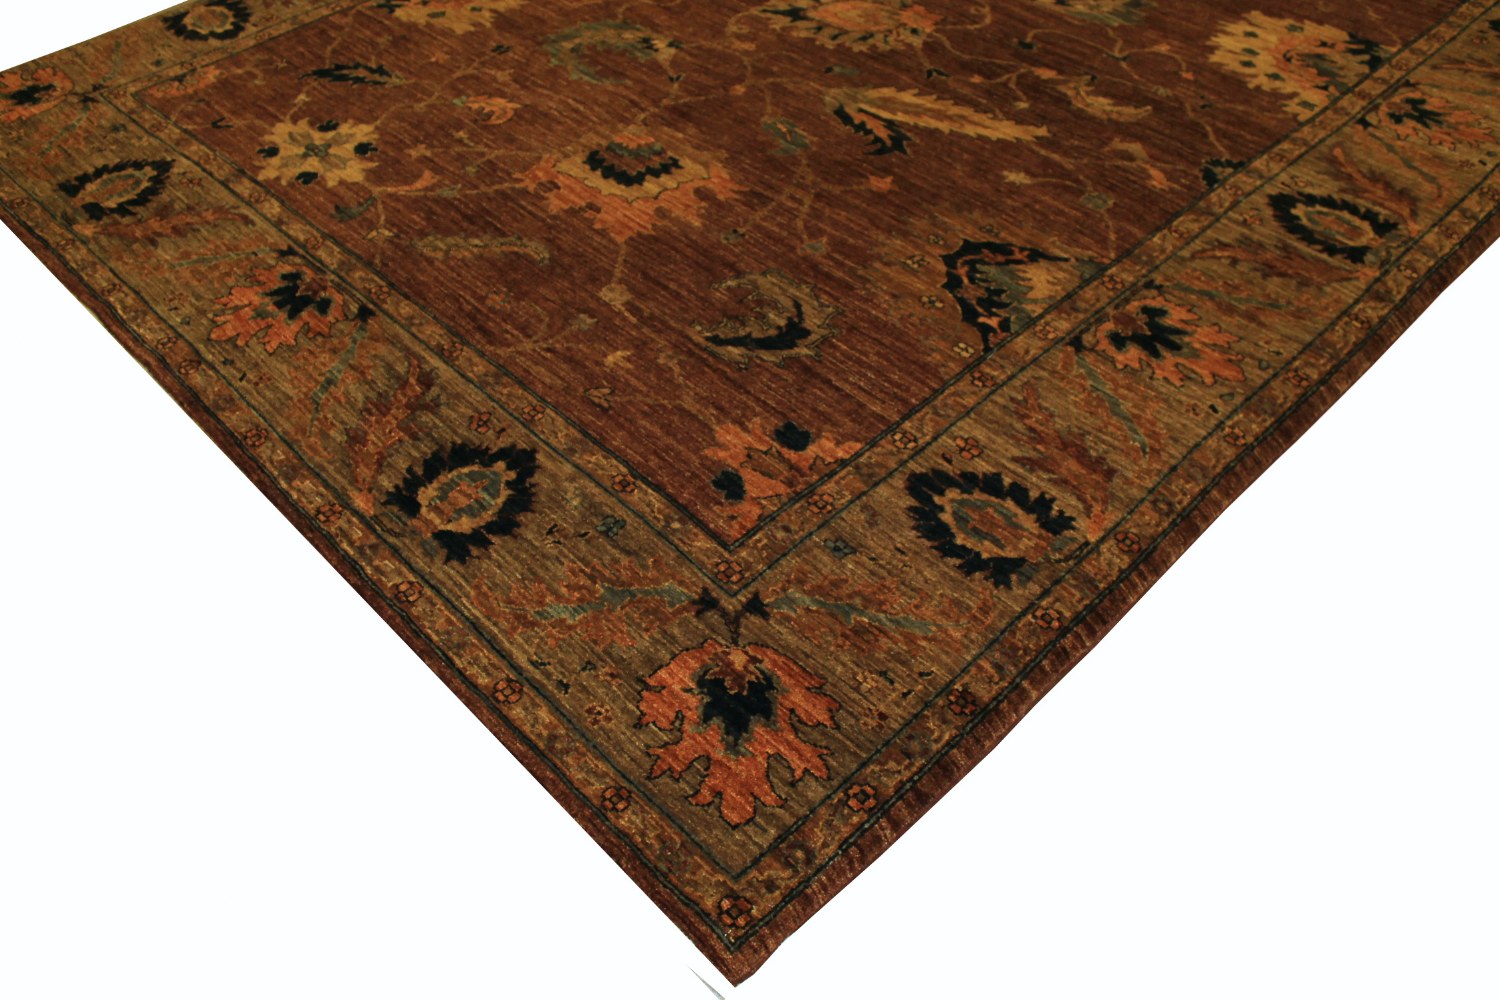 9x12 Antique Revival Hand Knotted Wool Area Rug - MR12409